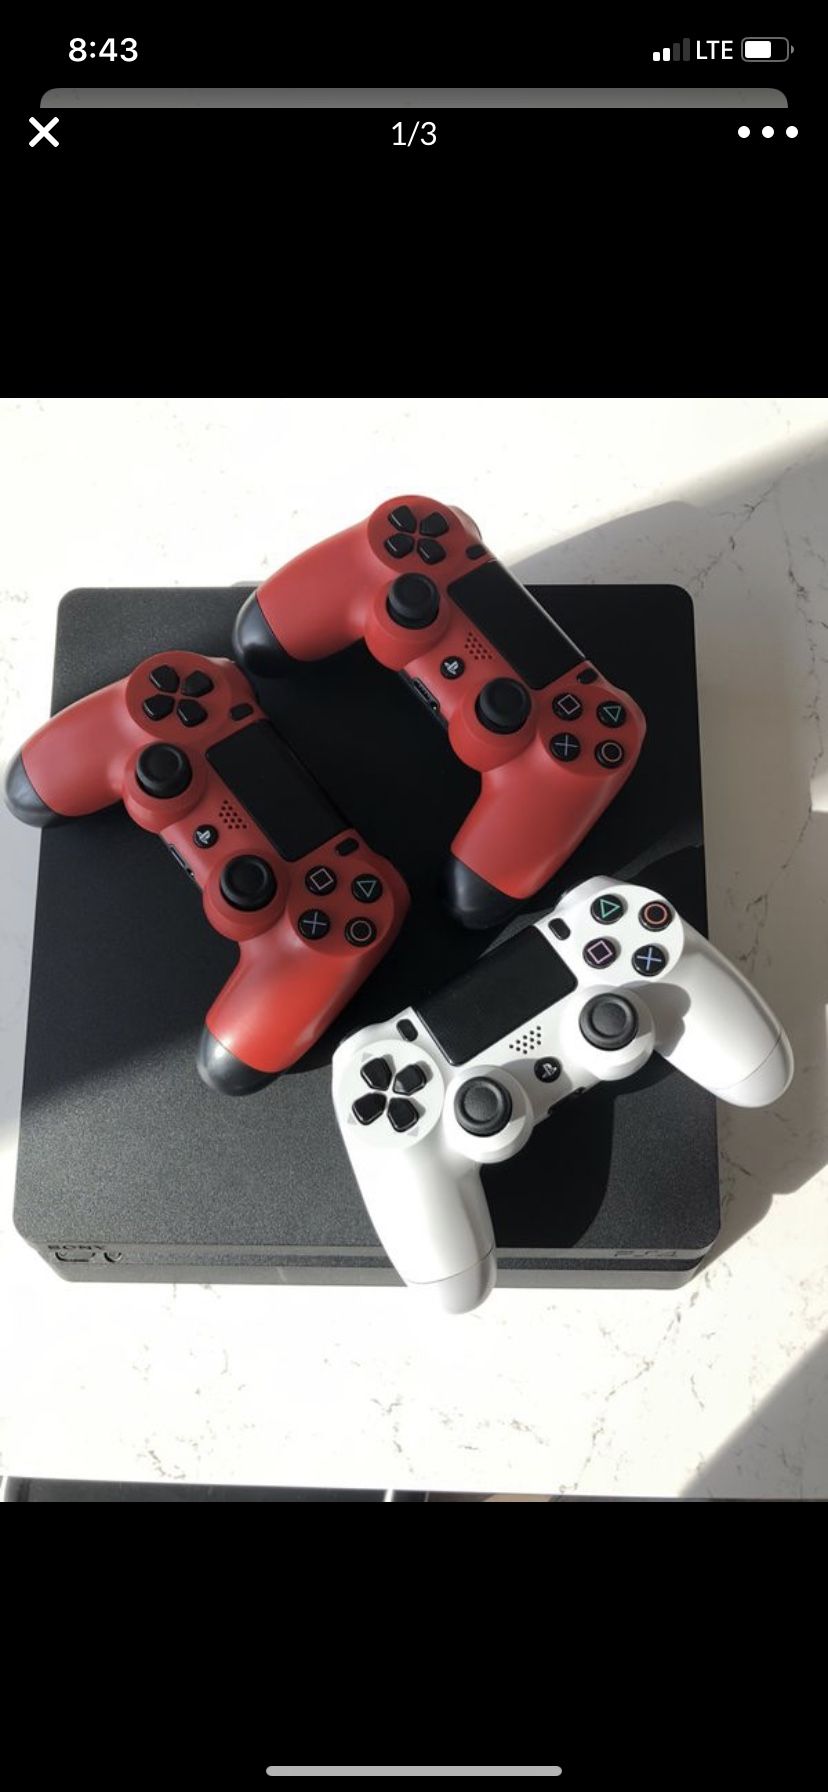 PS4 Game console Playstation // 3 remotes // great condition!